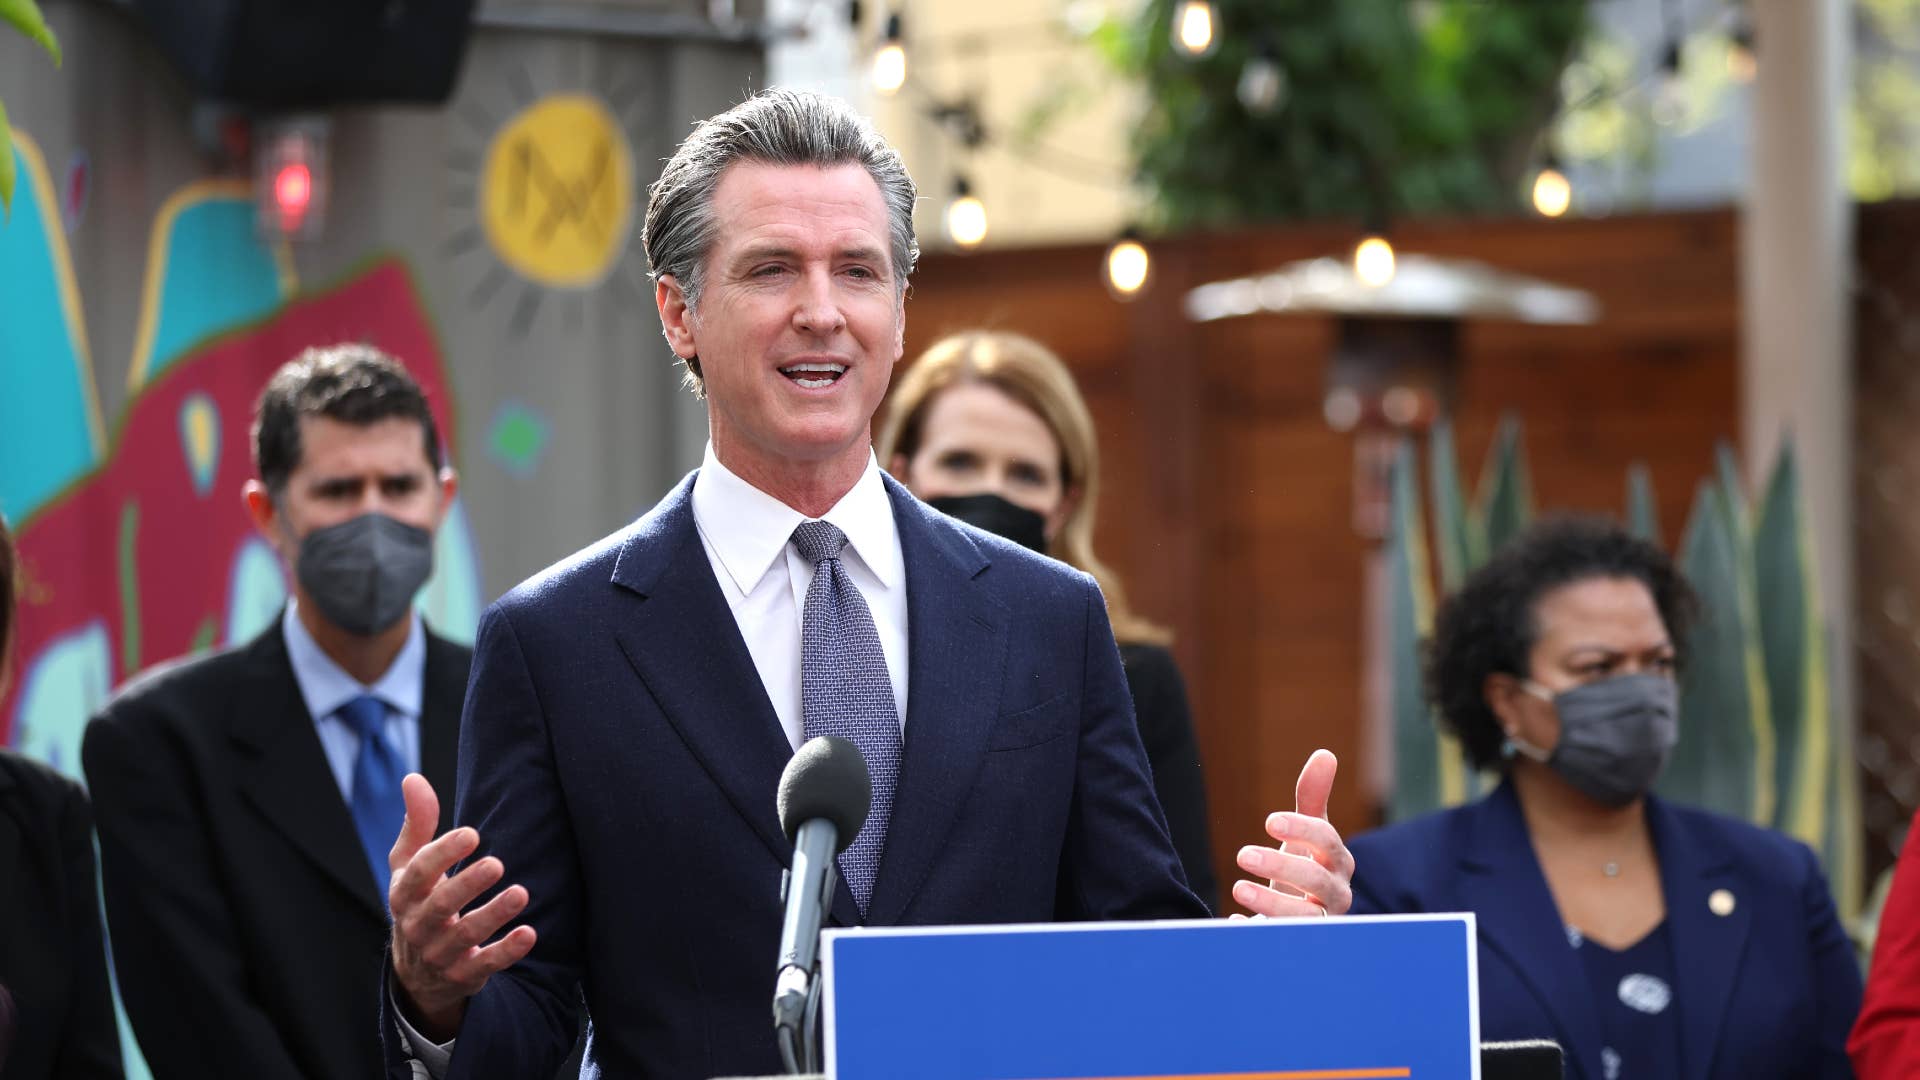 Governor Gavin Newsom is pictured at an event